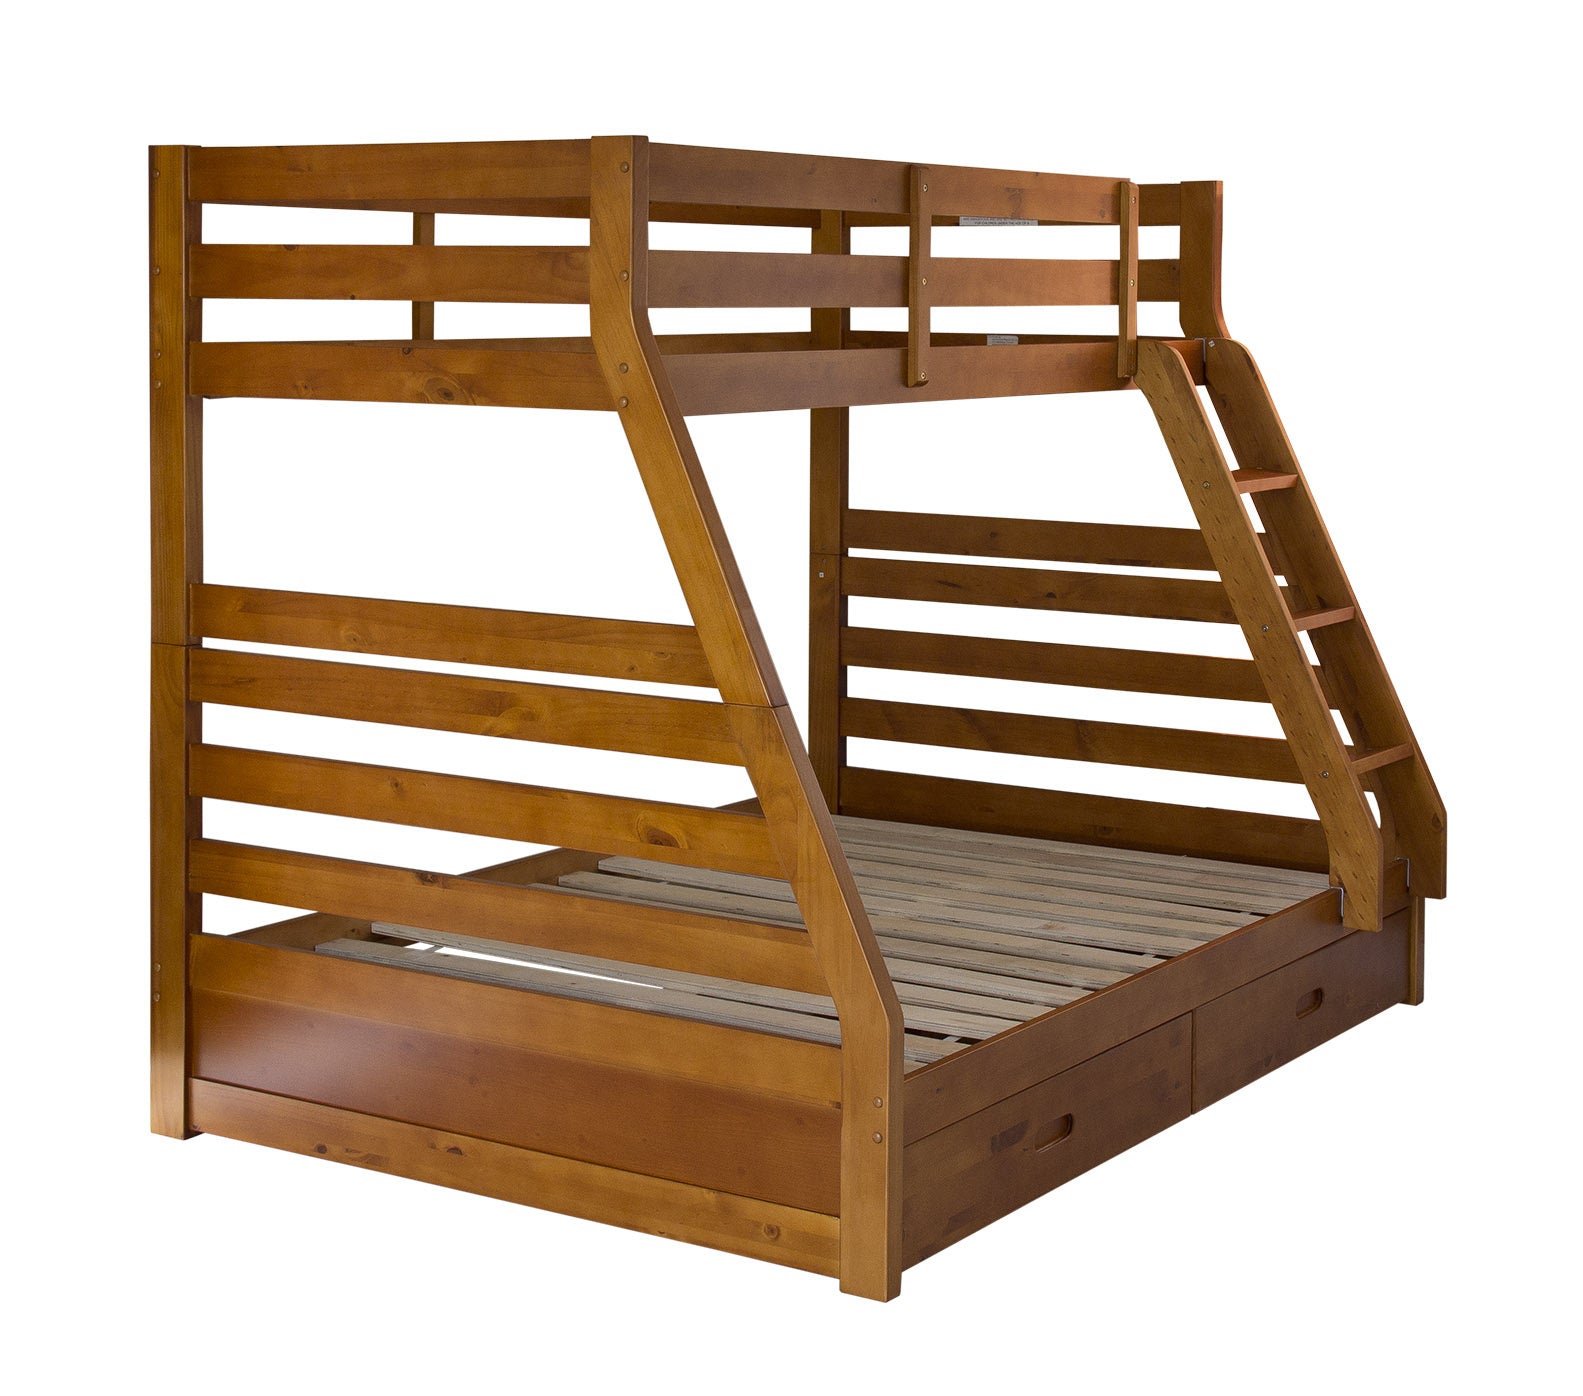 WANAKA BUNK BED - LIGHT WALNUT OR WHITE PAINTED.